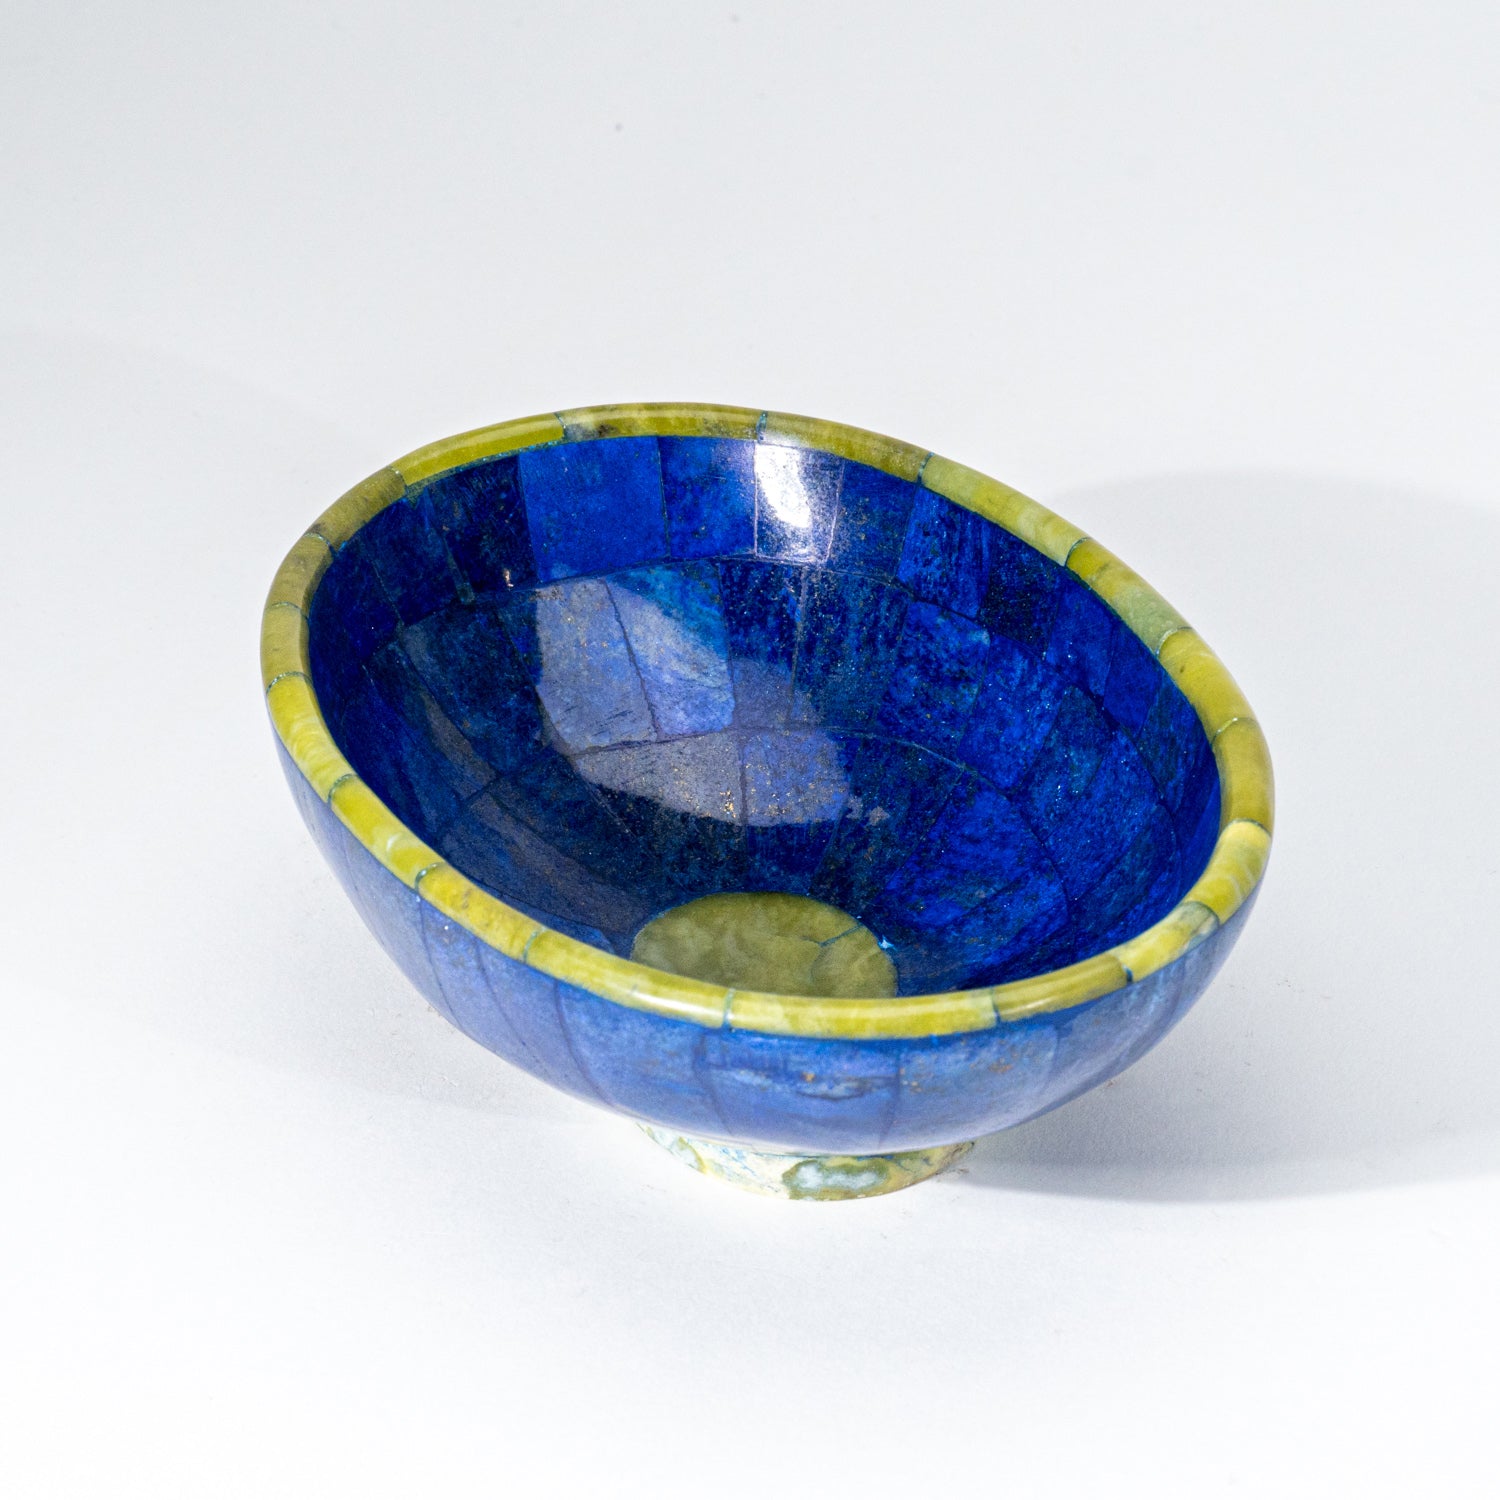 Genuine Polished Lapis Lazuli Oval Bowl With Green Jade Trimming (424.2 grams)